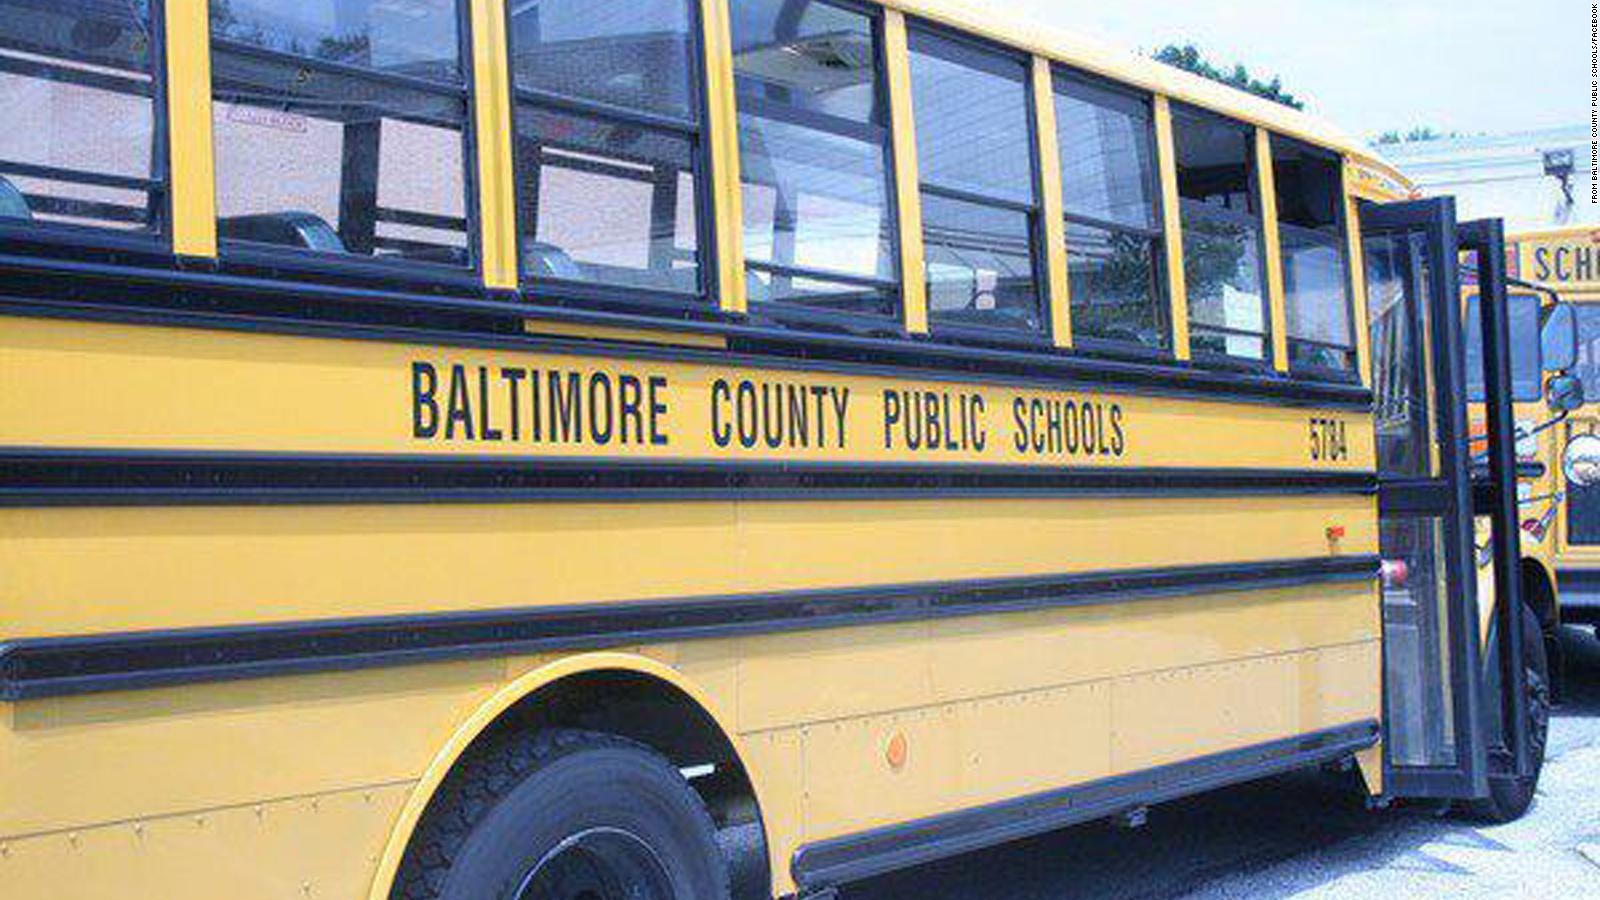 baltimore-county-schools-will-reopen-wednesday-after-being-closed-due-to-cyberattack-cnn